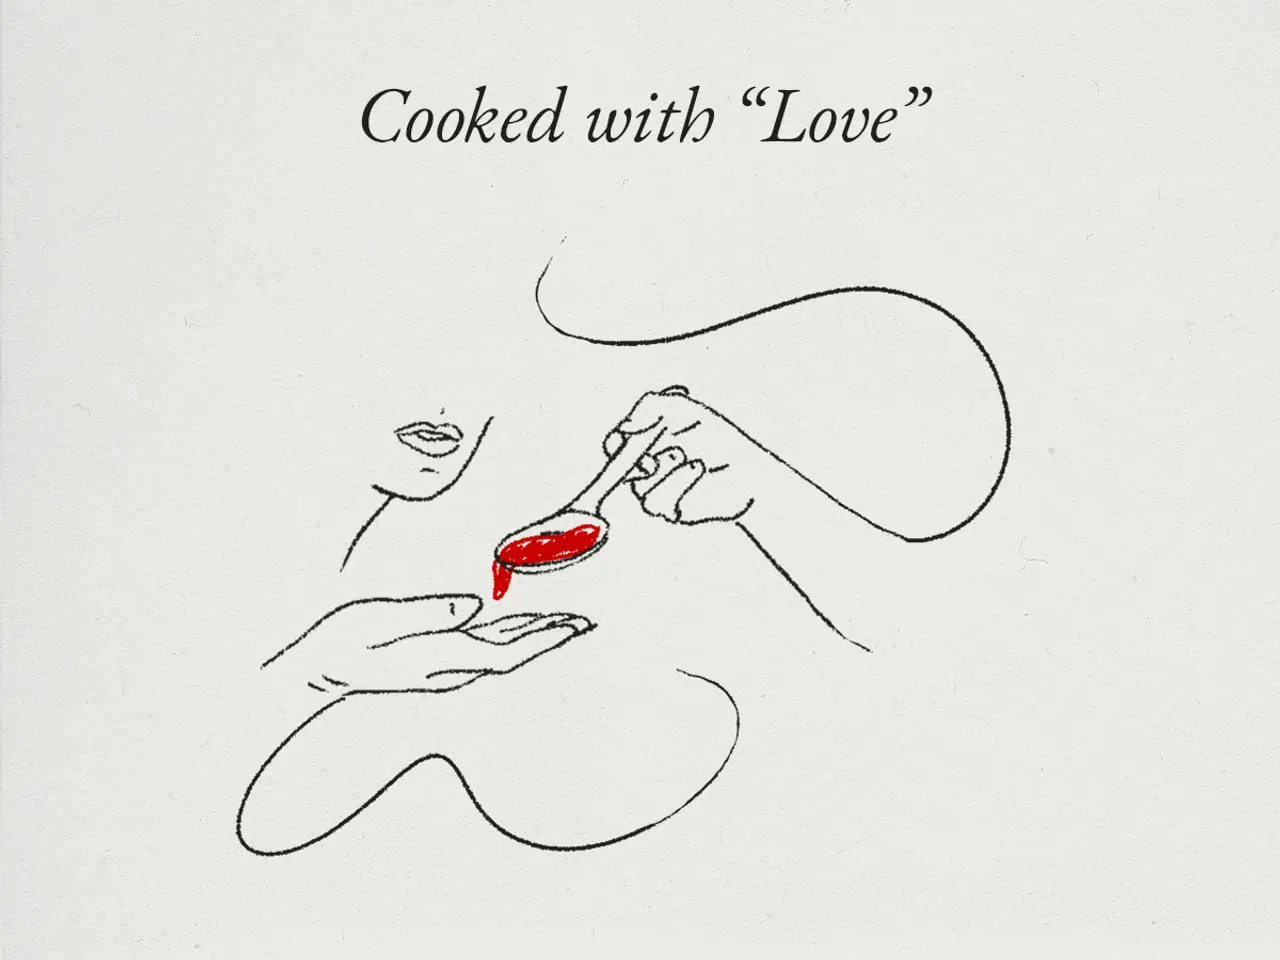 A minimalist line drawing depicts a spoon being held over a hand with the caption "Cooked with 'Love'" and a touch of red color highlighting what appears to be a spoonful of food.